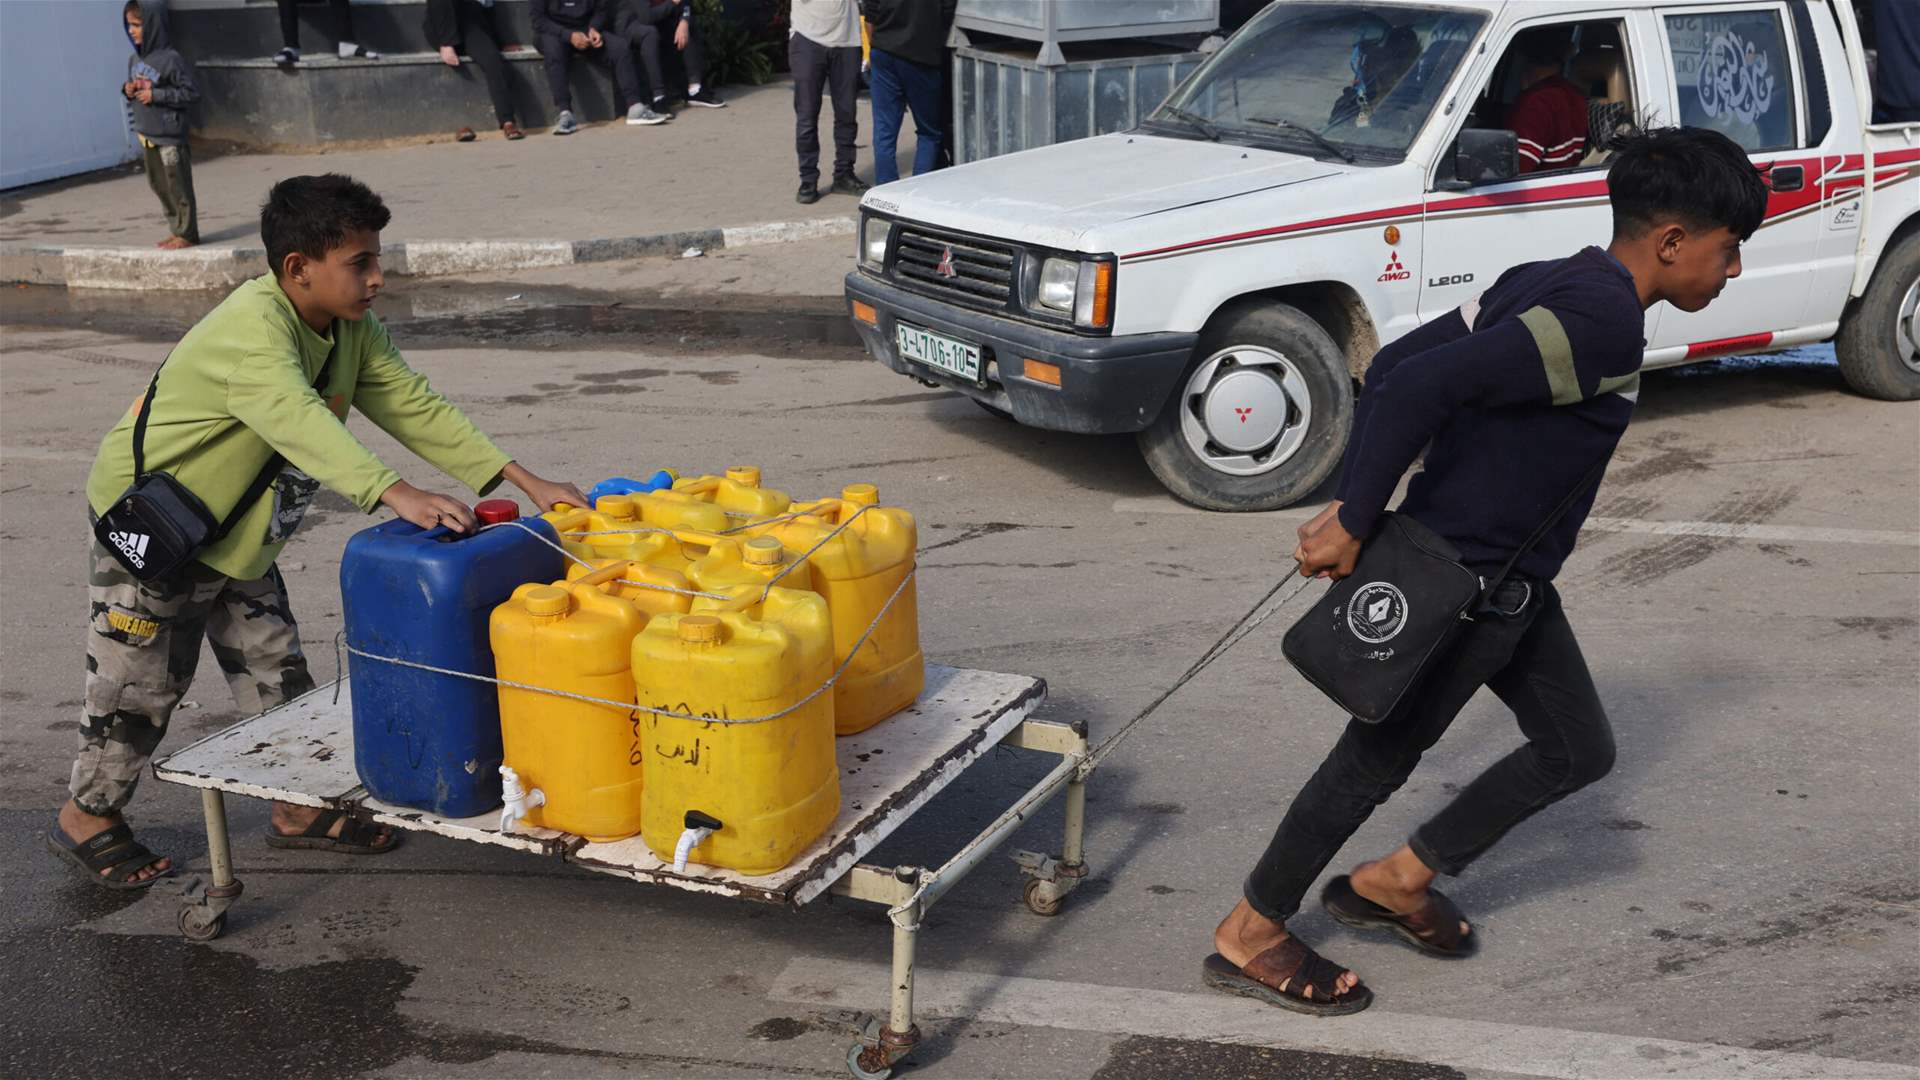 UNRWA: Limited clean water access puts thousands at risk in Gaza